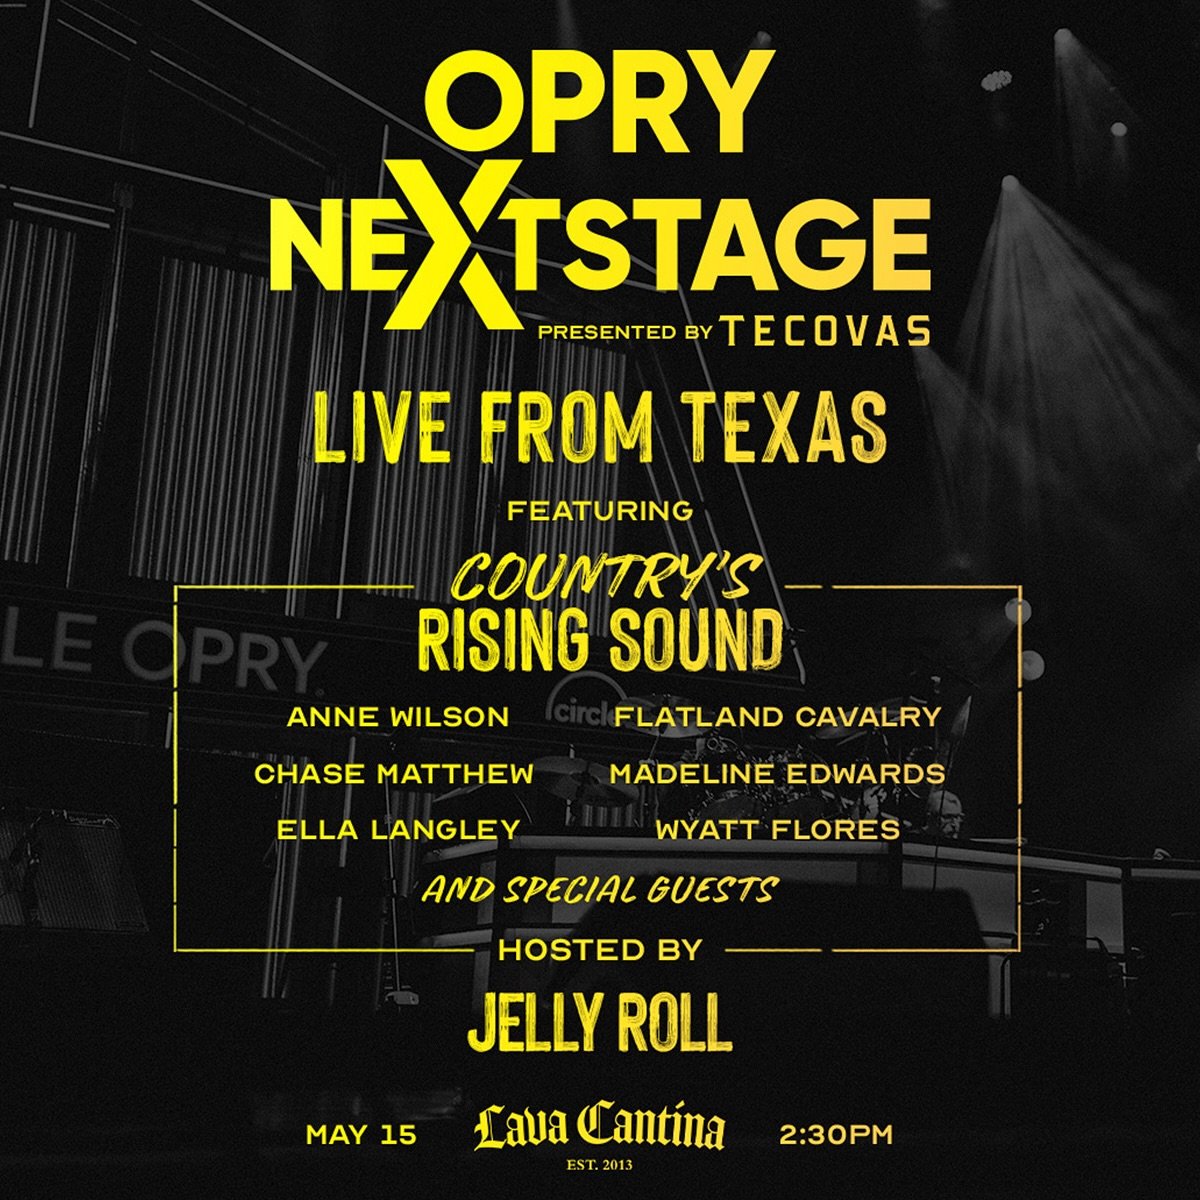 🚨SPECIAL ANNOUNCEMENT!🚨

🔥A very limited number of additional tix for Opry NextStage @lavacantinatc ON SALE NOW!🔥

🎟️🎟️➡️ LavaCantina.com

👀Meet the future of country music at Opry NextStage Live from Texas! Join us at Lava Cantina on May 15th